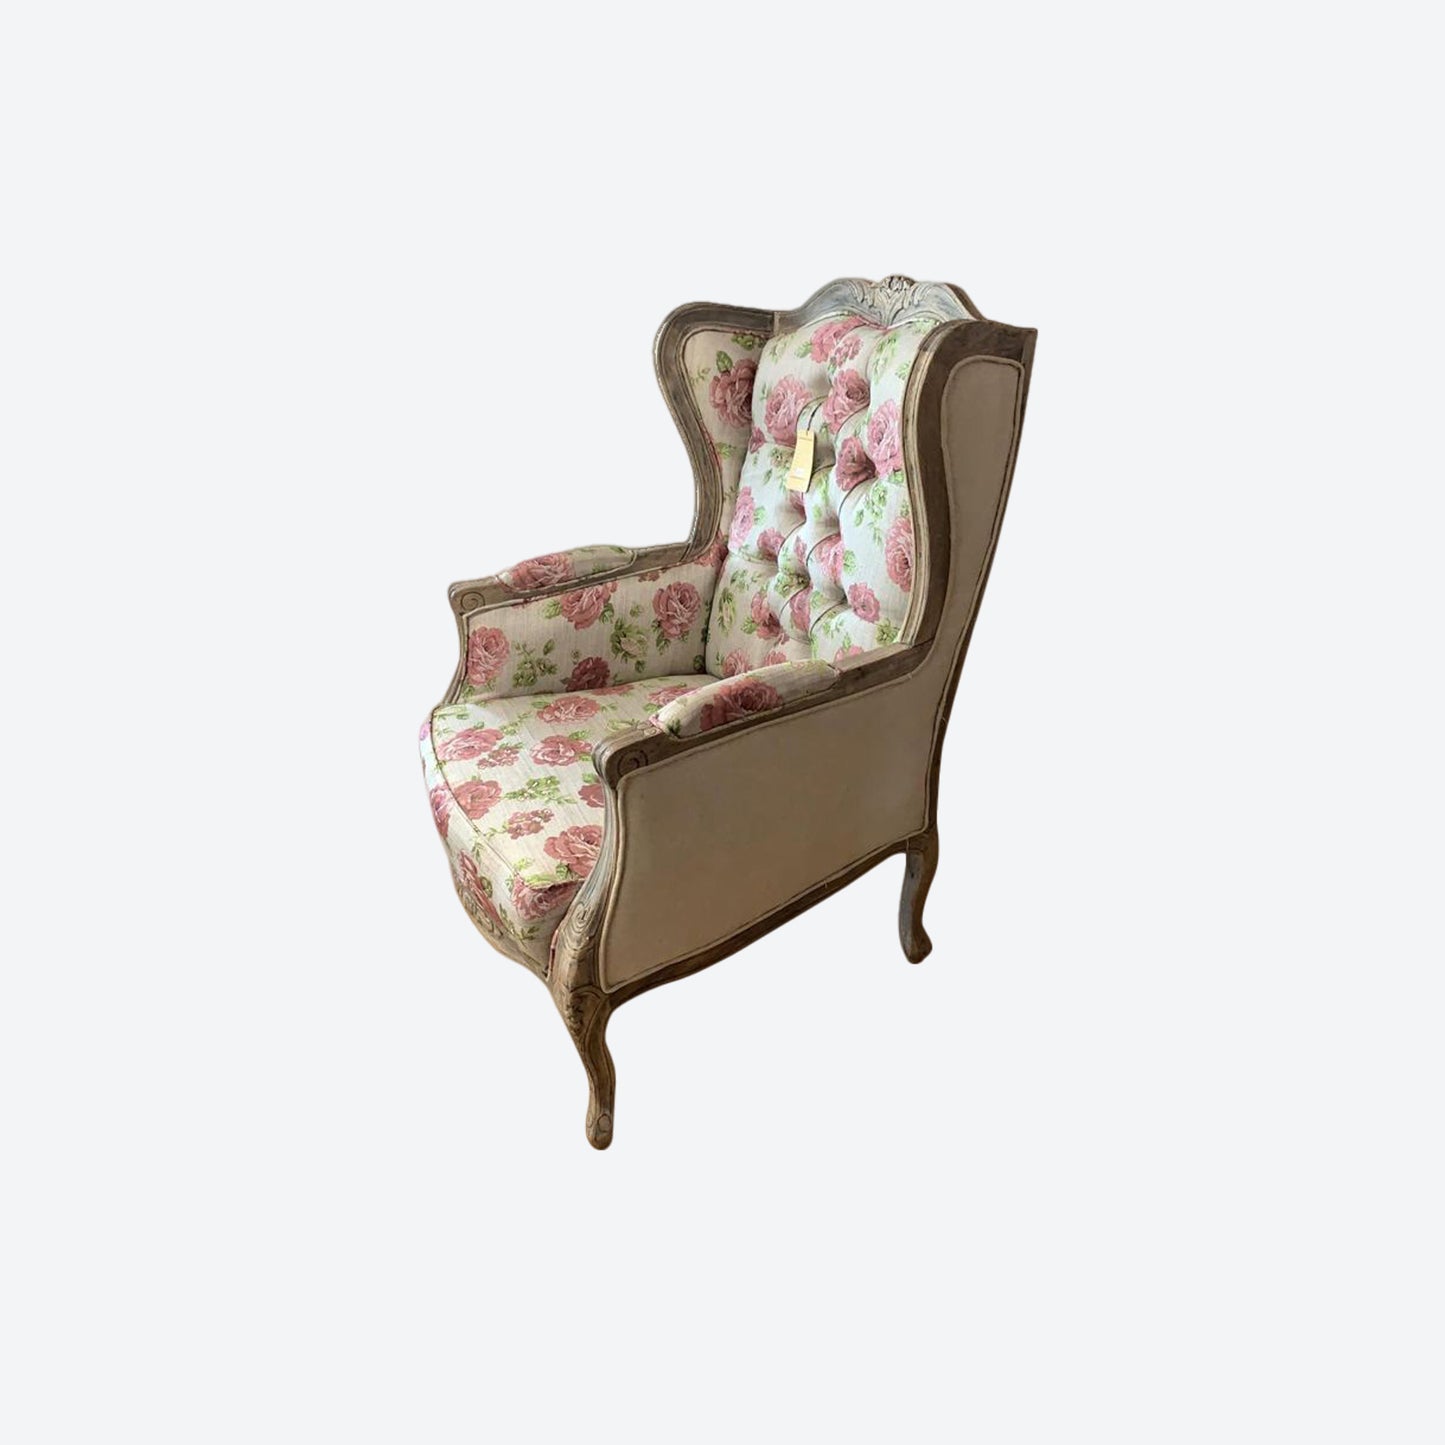 Tufted Organic Canvas Fabric Accent Chair With Cedar Wood Trim And Legs -SK- SKU 1161